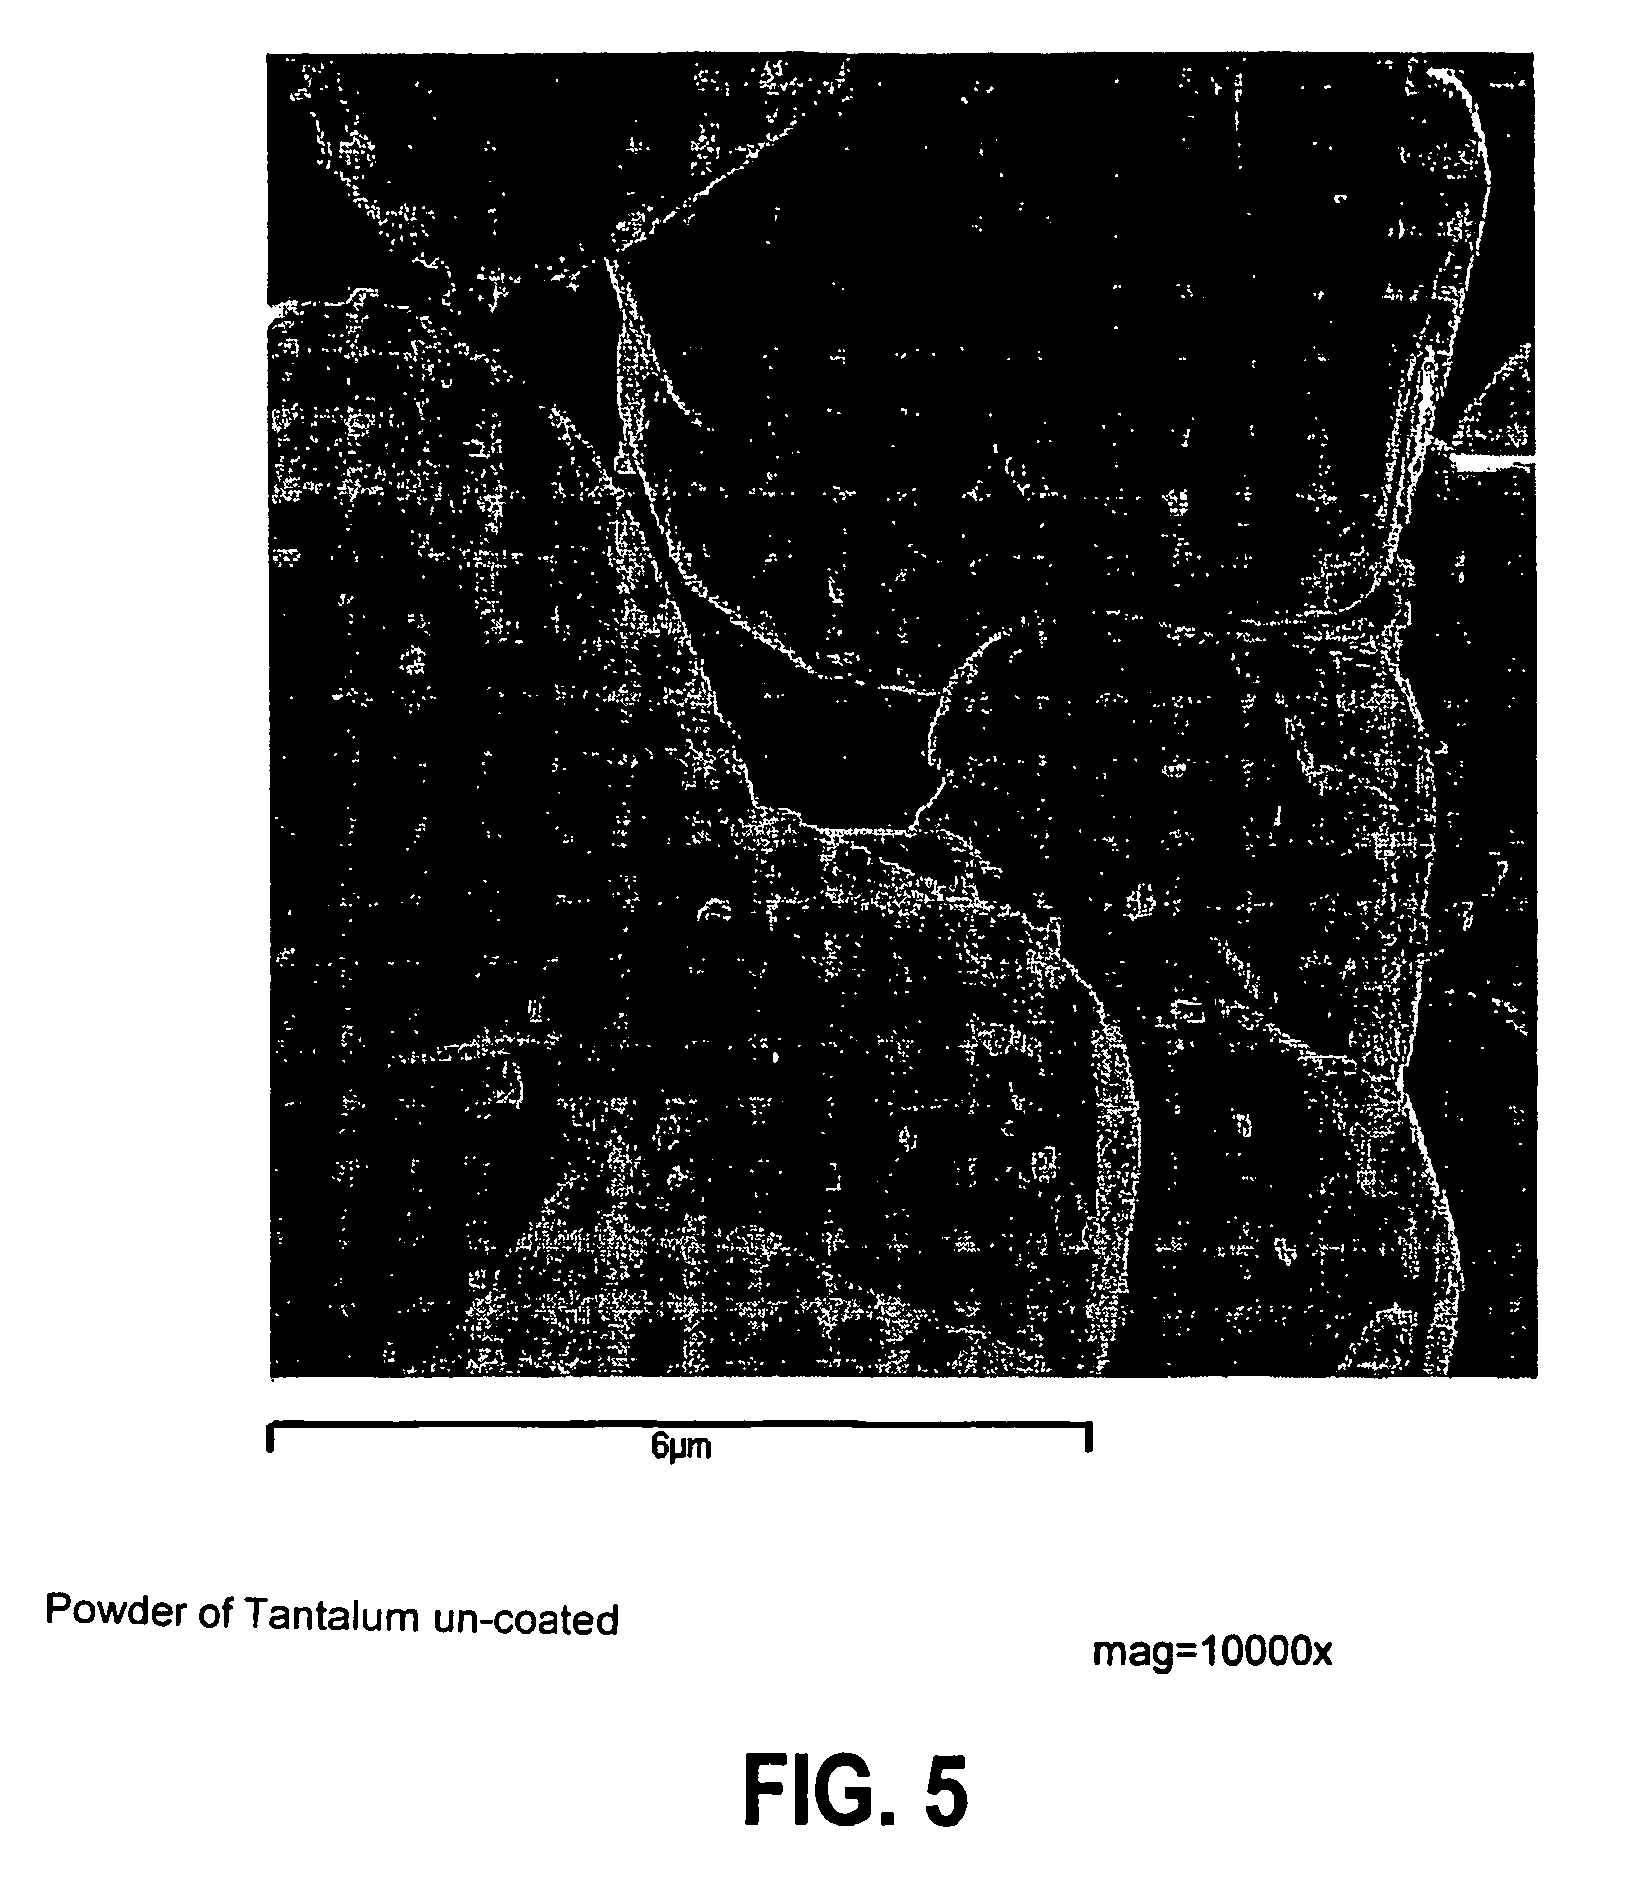 Bone cement containing coated radiopaque particles and its preparation